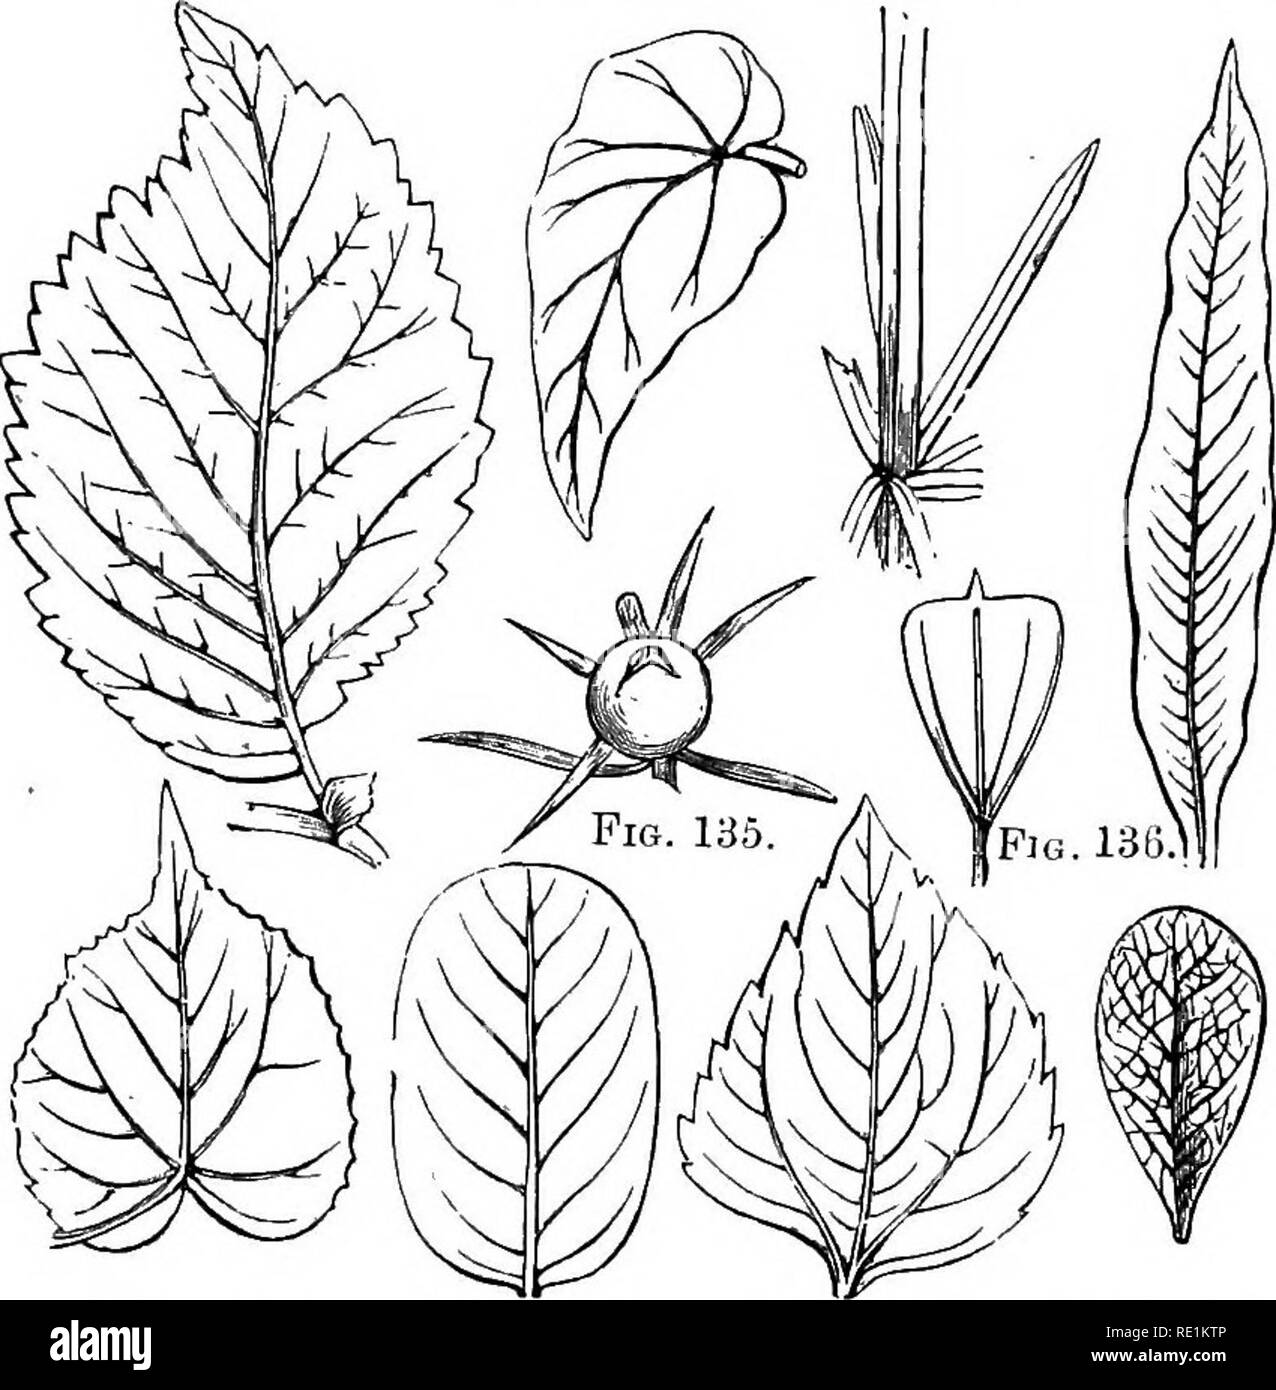 . A manual of botany. Botany. GENERAL MORPHOLOGY OF THE PLANT 73 it is prcemurse, as in the leaf of Ccvryota urens. When the apex IS sharp, so that the two margins form an acute angle with each other (figs. 132 and 139), it is acute or sharp-powited; when the point is very long, and tapering {fig. 137), it is acuminate or taper-pointed, as in the leaf of the White Willow and common Fig. 131. Fig. 132. Fig. 133. Fig. 134.. Fig. 137. Fig. 138. Fig. 139. Fig. 110. Fi^f. 131. Leaf of Elm. with its margins bisen-ate, aud the lamina unequal at its base. Fig. 132. Unequal or oblique leaf of a species Stock Photo